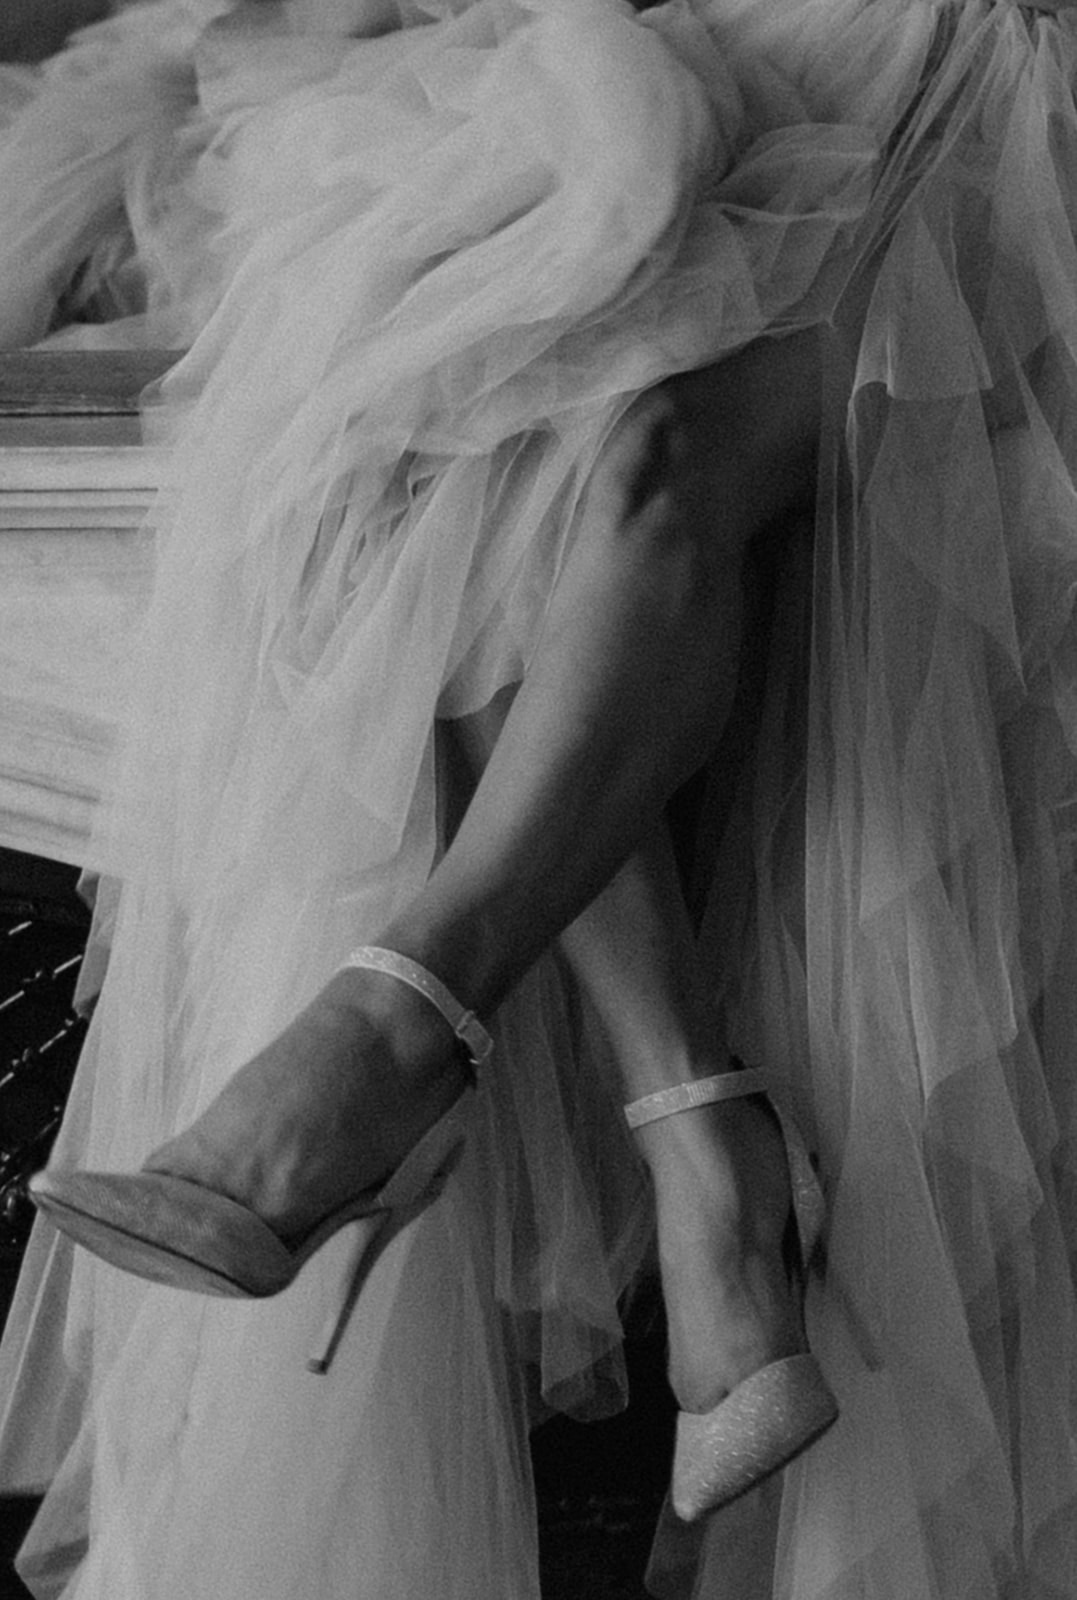 Black & white close up of stiletto heels and tulle dress